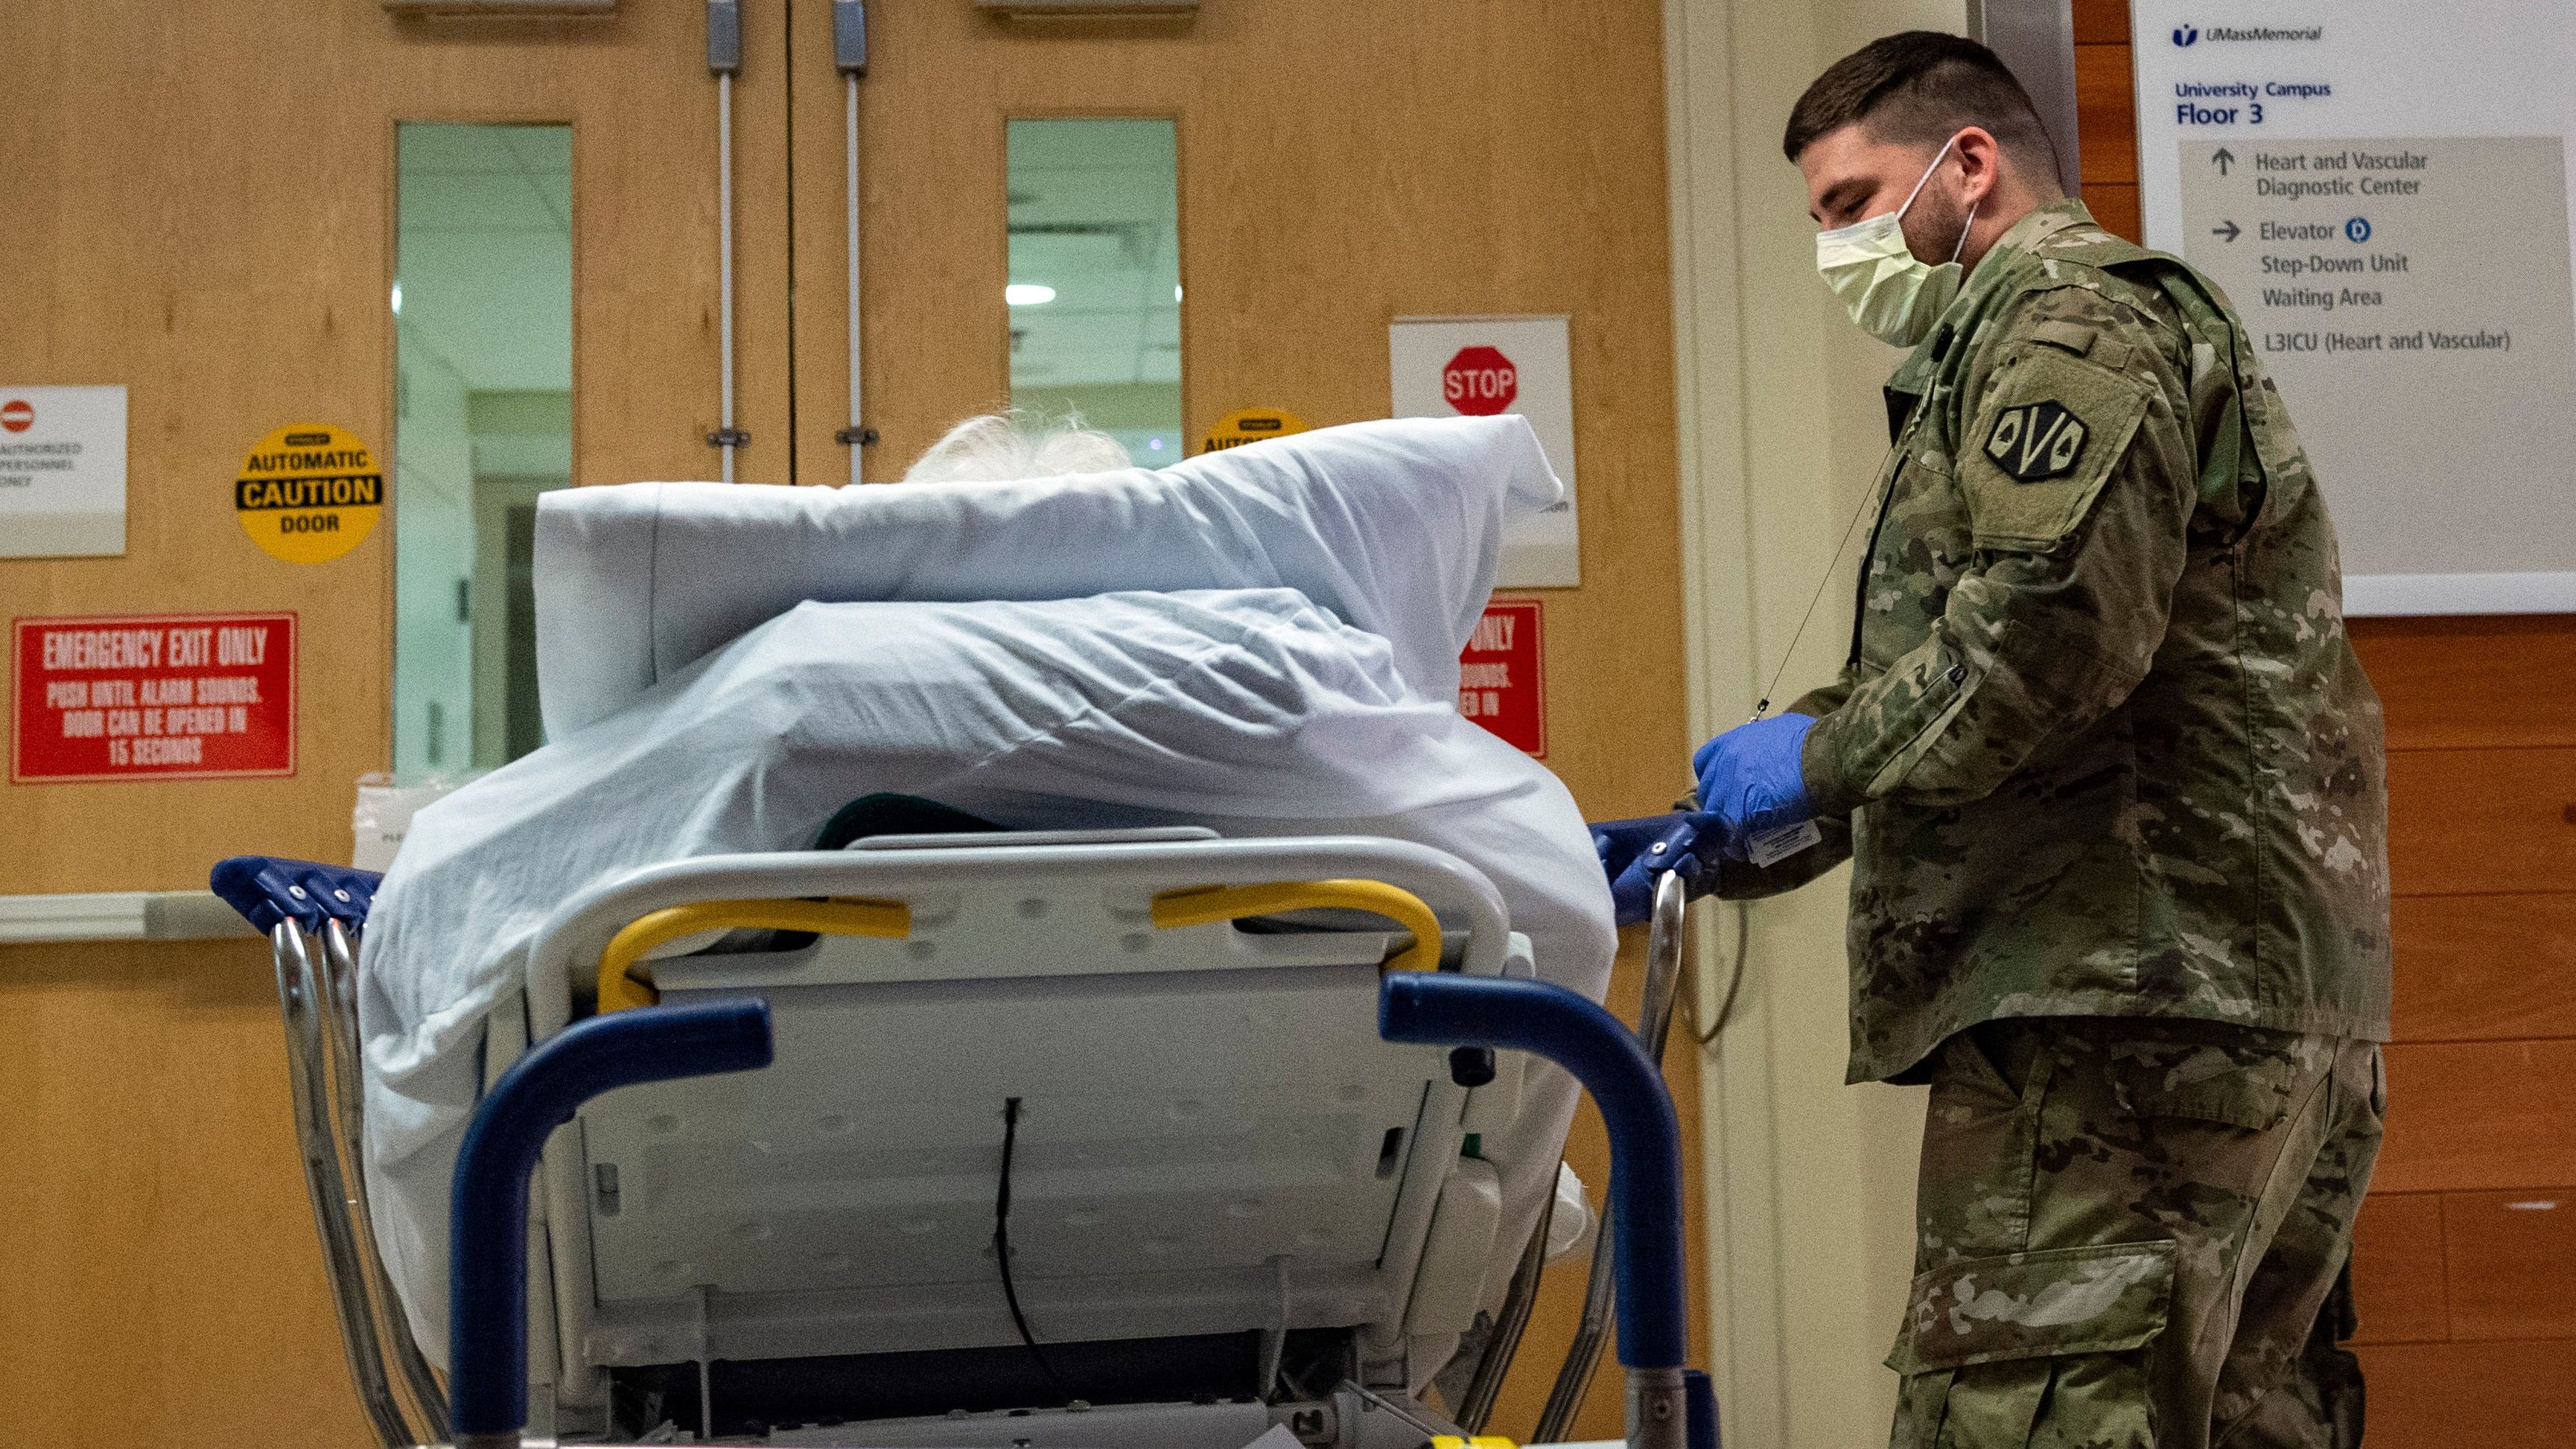 A soldier transports a patient at UMass Memorial Medical Center in Worcester, Massachusetts on December 30, 2021. 